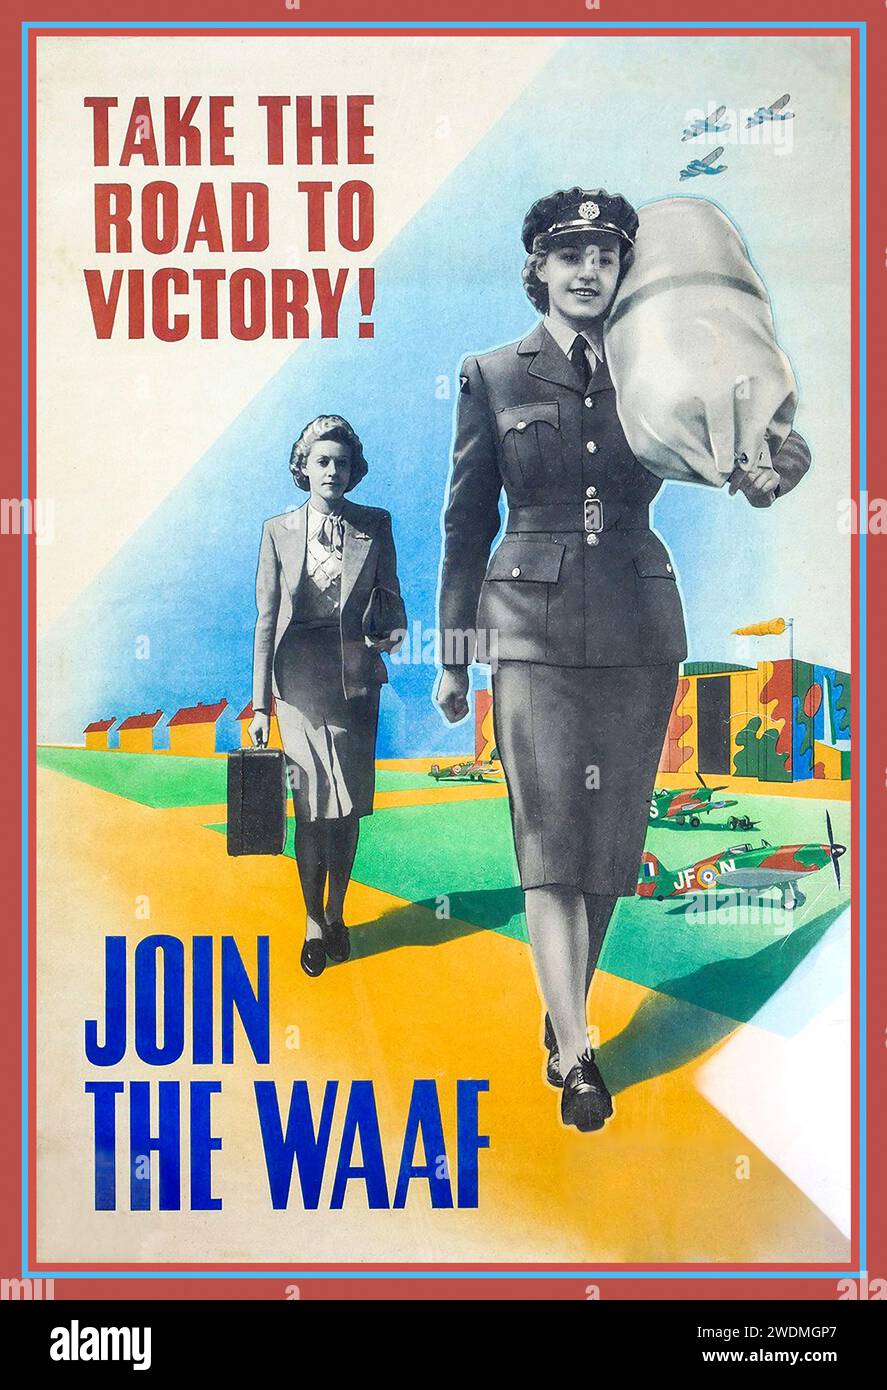 WAAF WW2 UK 1940s Recruitment poster for the WAAF  'Take The Road To Victory' 'Join The WAAF' Womens Auxillary Air Force. With Spitfire aircraft illustrated behind on a RAF Airfield in Great Britain. World War 2 Second World War Stock Photo